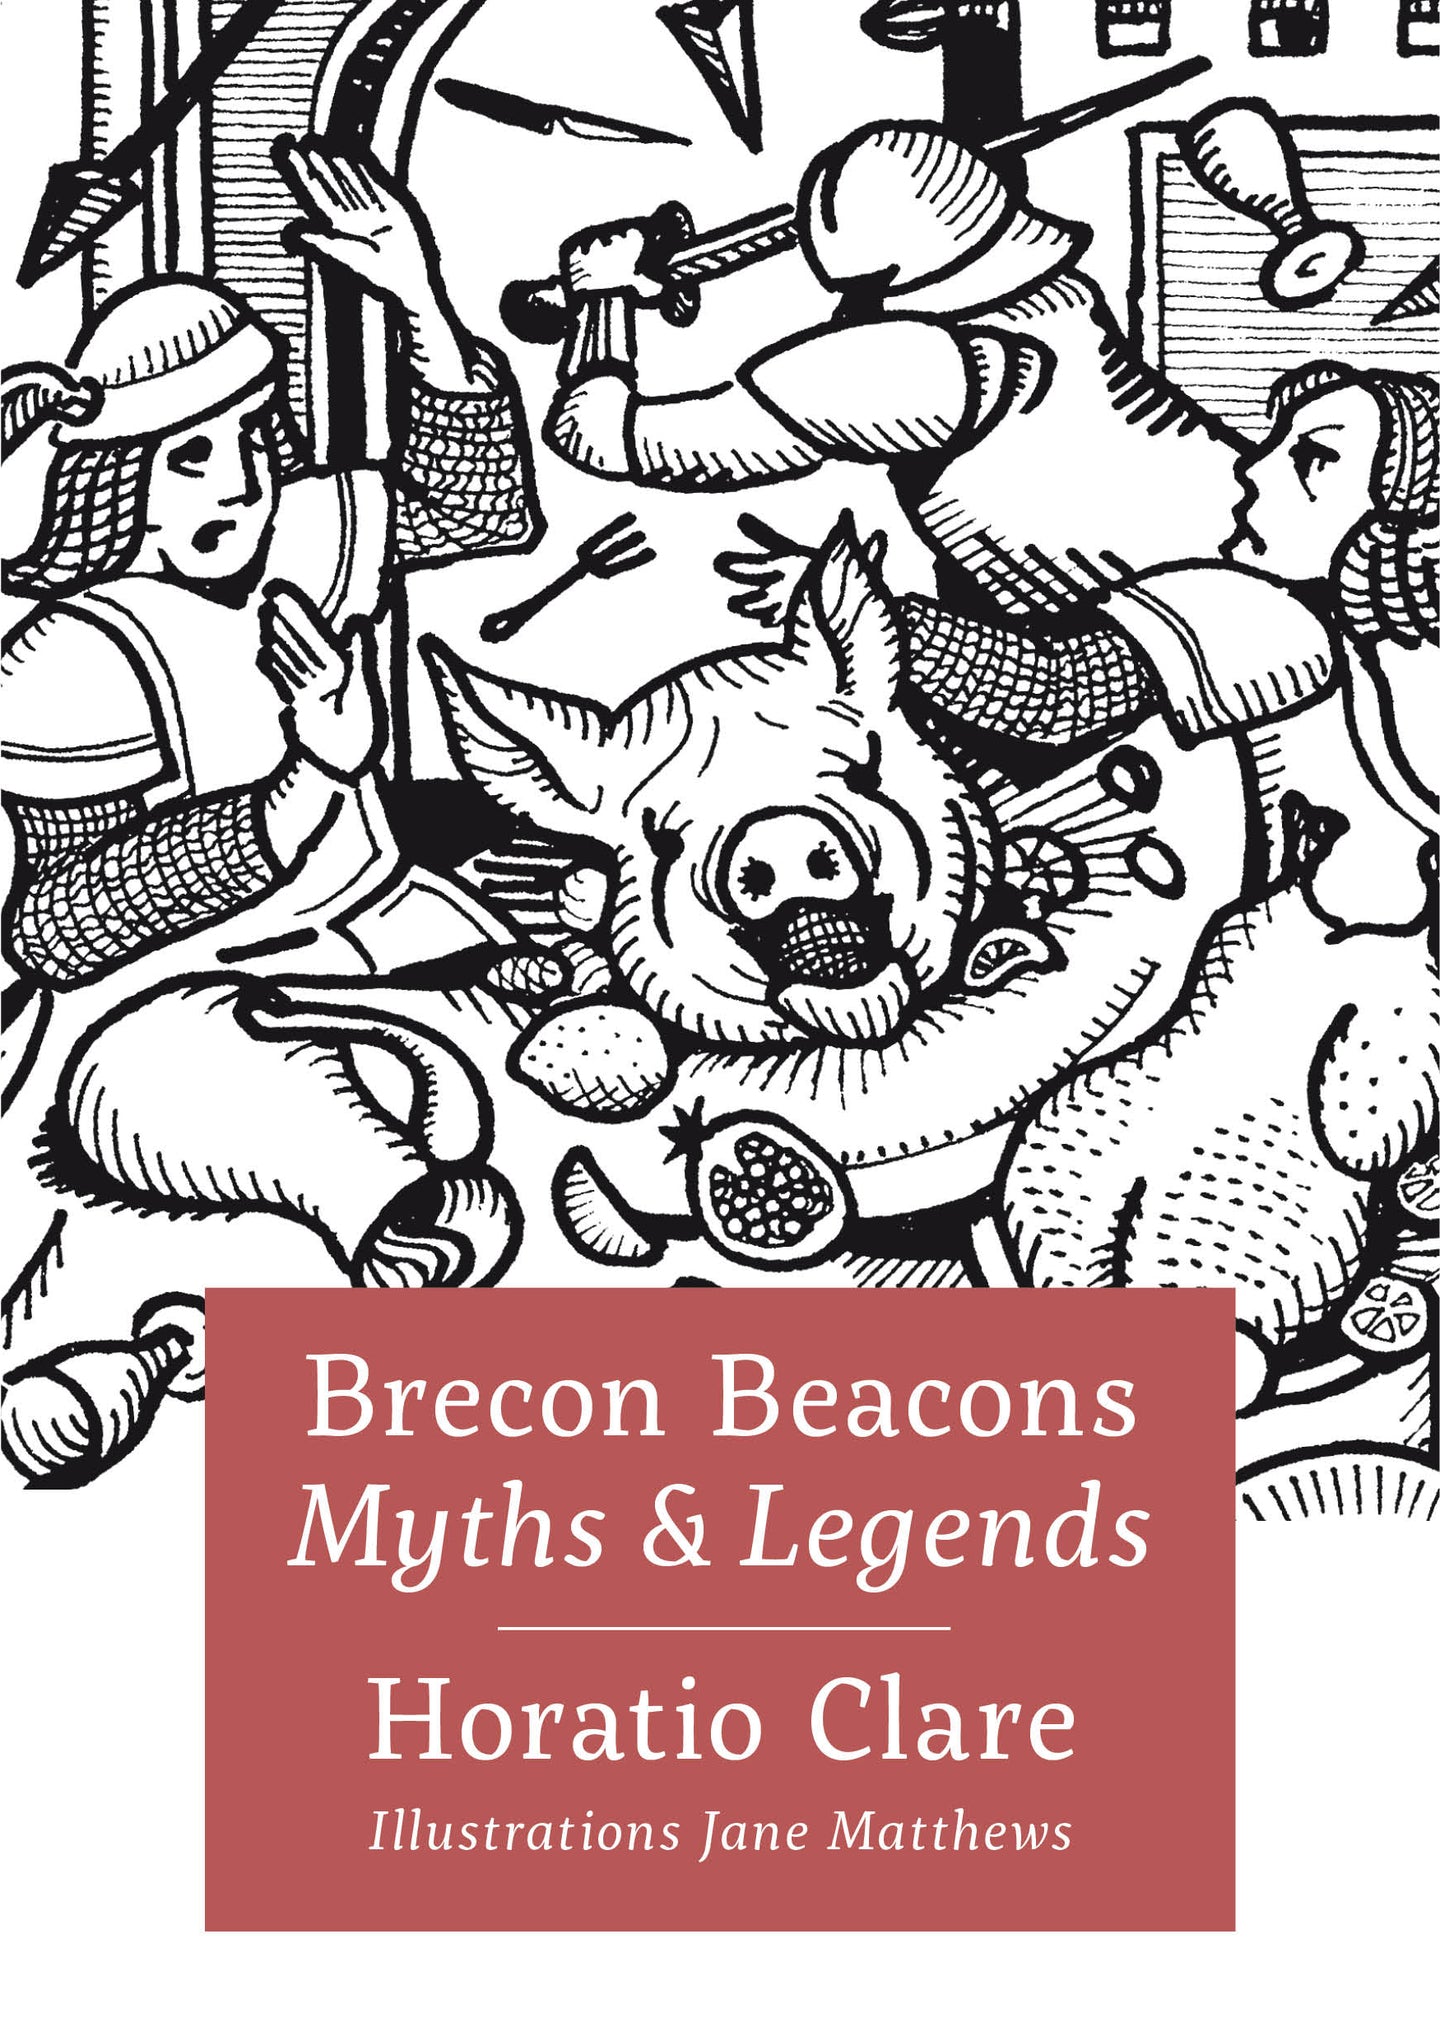 Brecon Beacons Myths & Legends by Horatio Clare